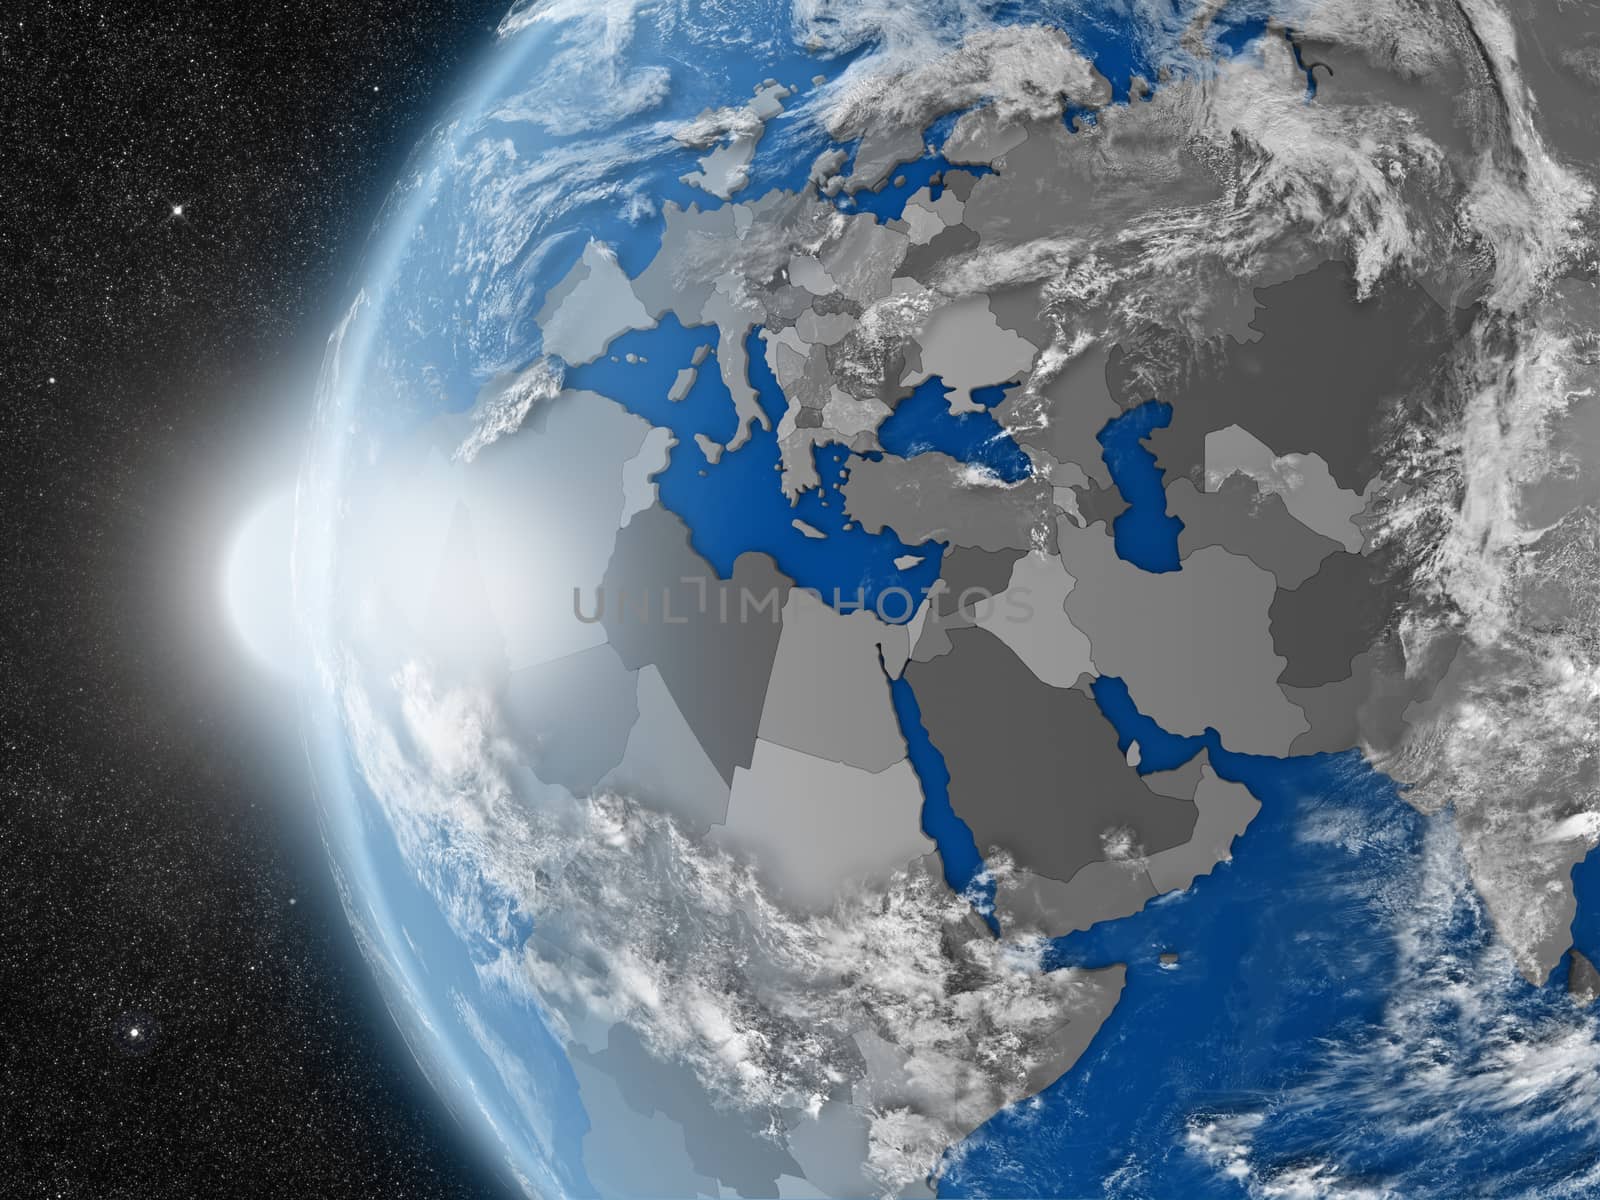 Concept of planet Earth as seen from space but with political borders aimed at EMEA region